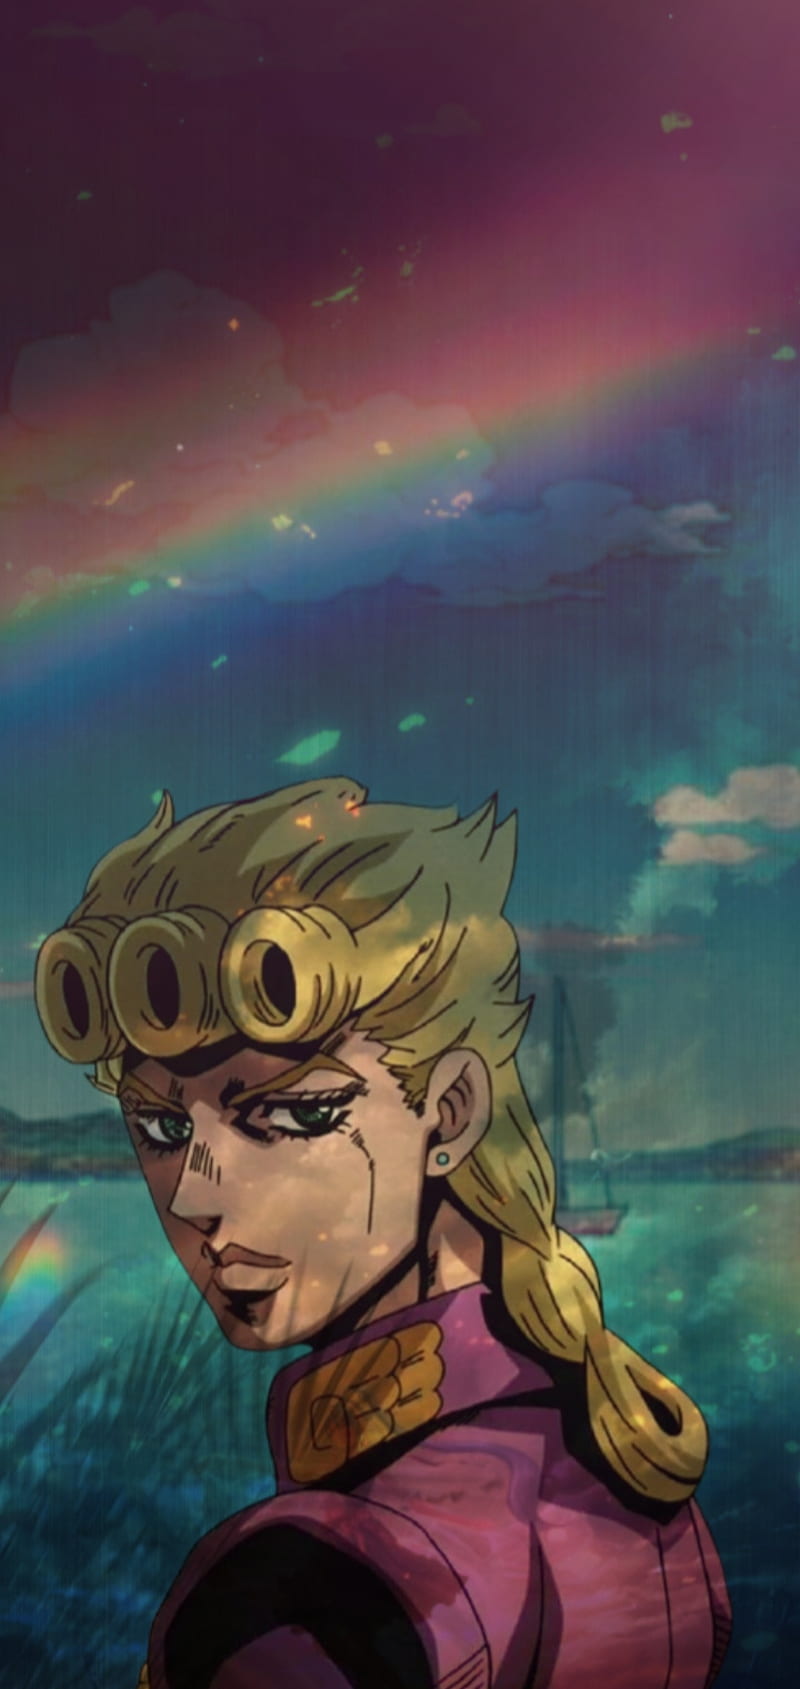 Giorno Giovanna wallpaper by TwoWhOleWeEbs  Download on ZEDGE  9447